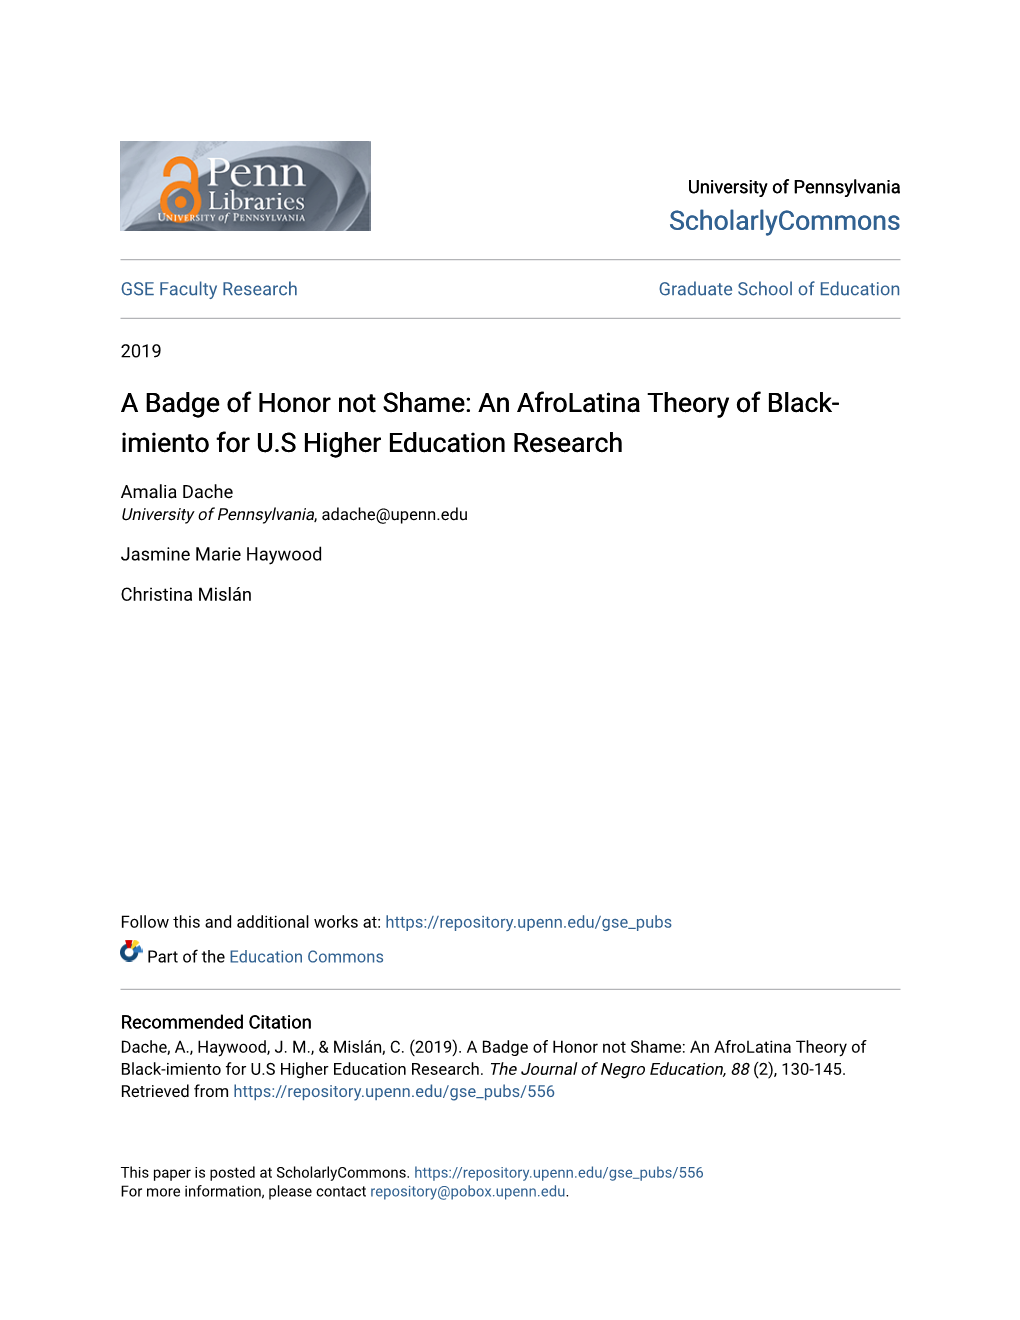 A Badge of Honor Not Shame: an Afrolatina Theory of Black-Imiento for U.S Higher Education Research